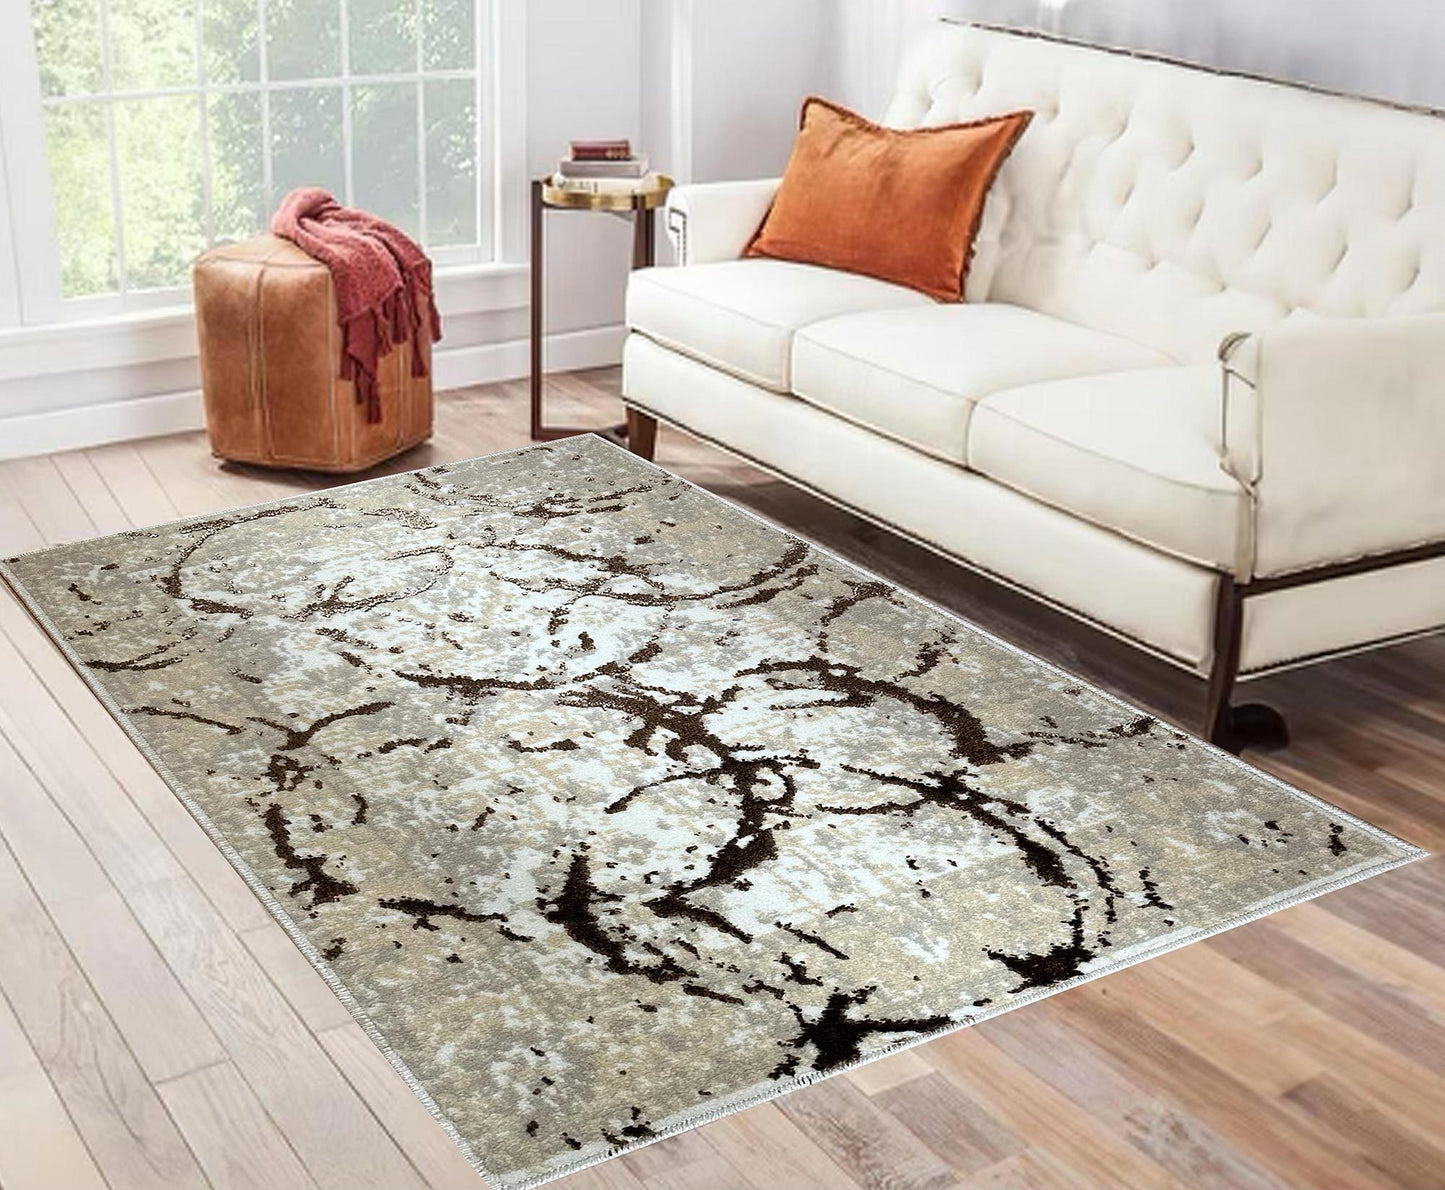 Penina Area Rug in Beige/Gray with Bronze Circles 9X12